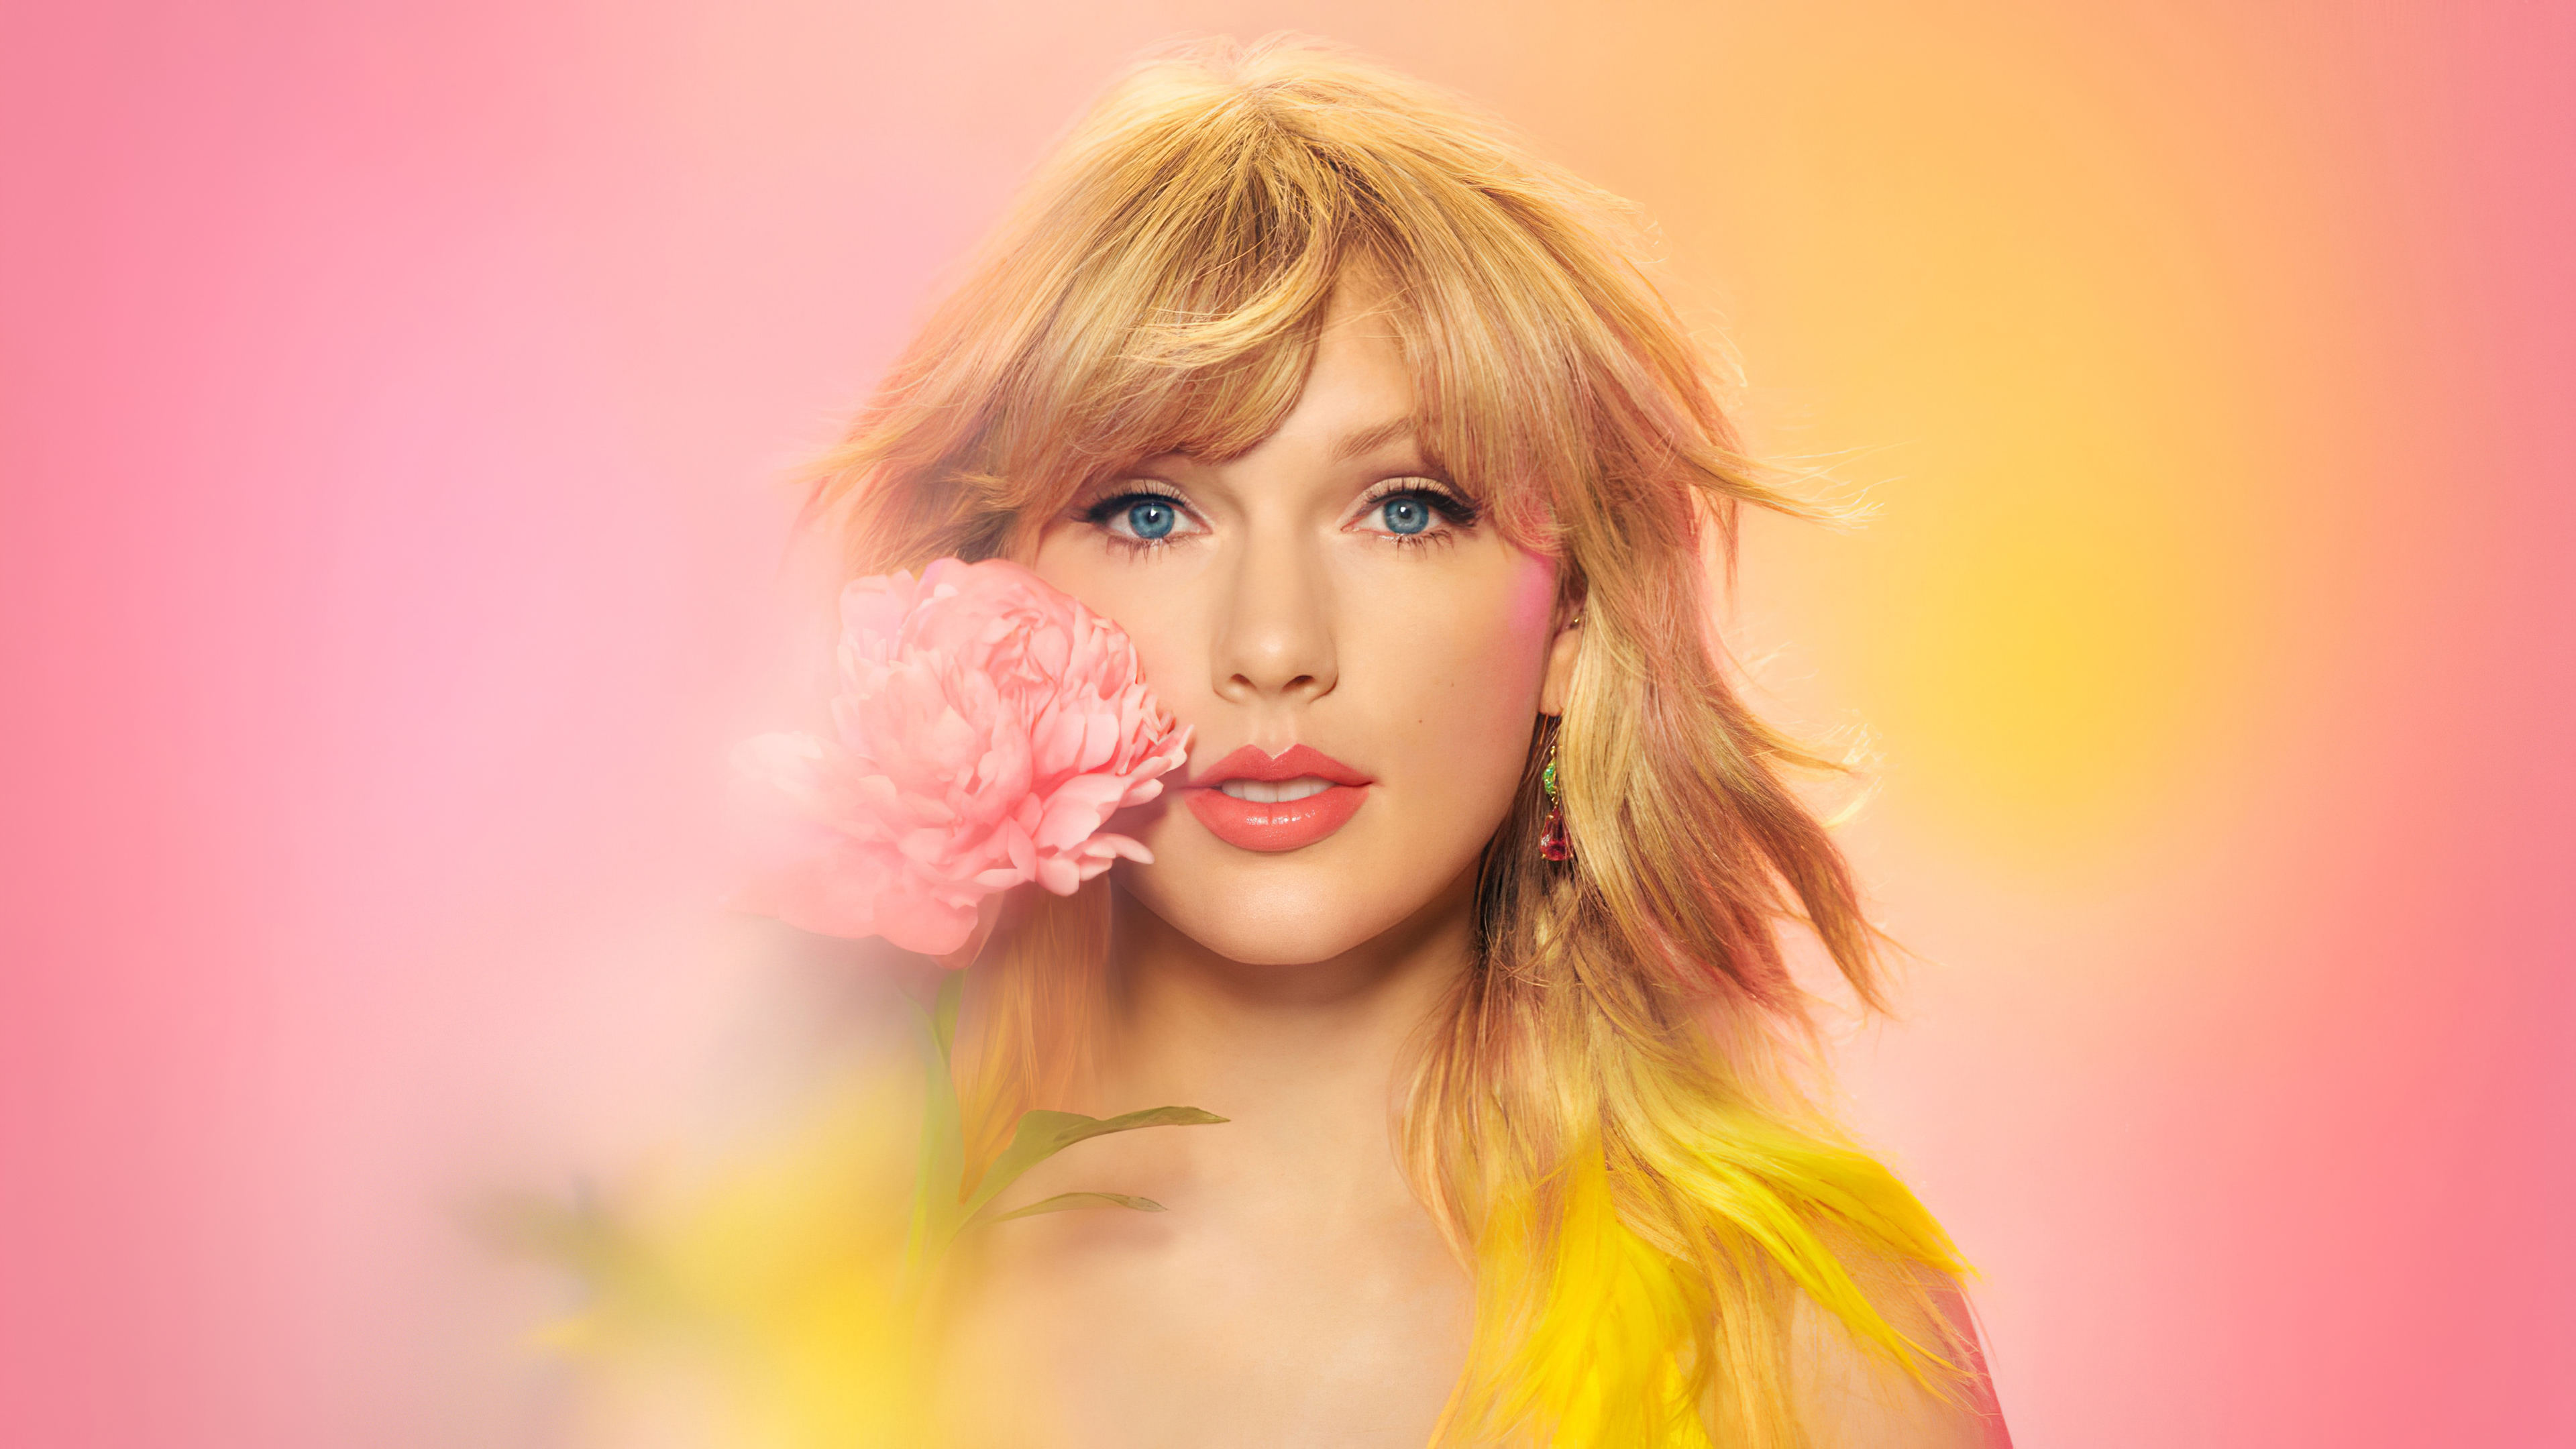 39] Taylor Swift 2020 Wallpapers on